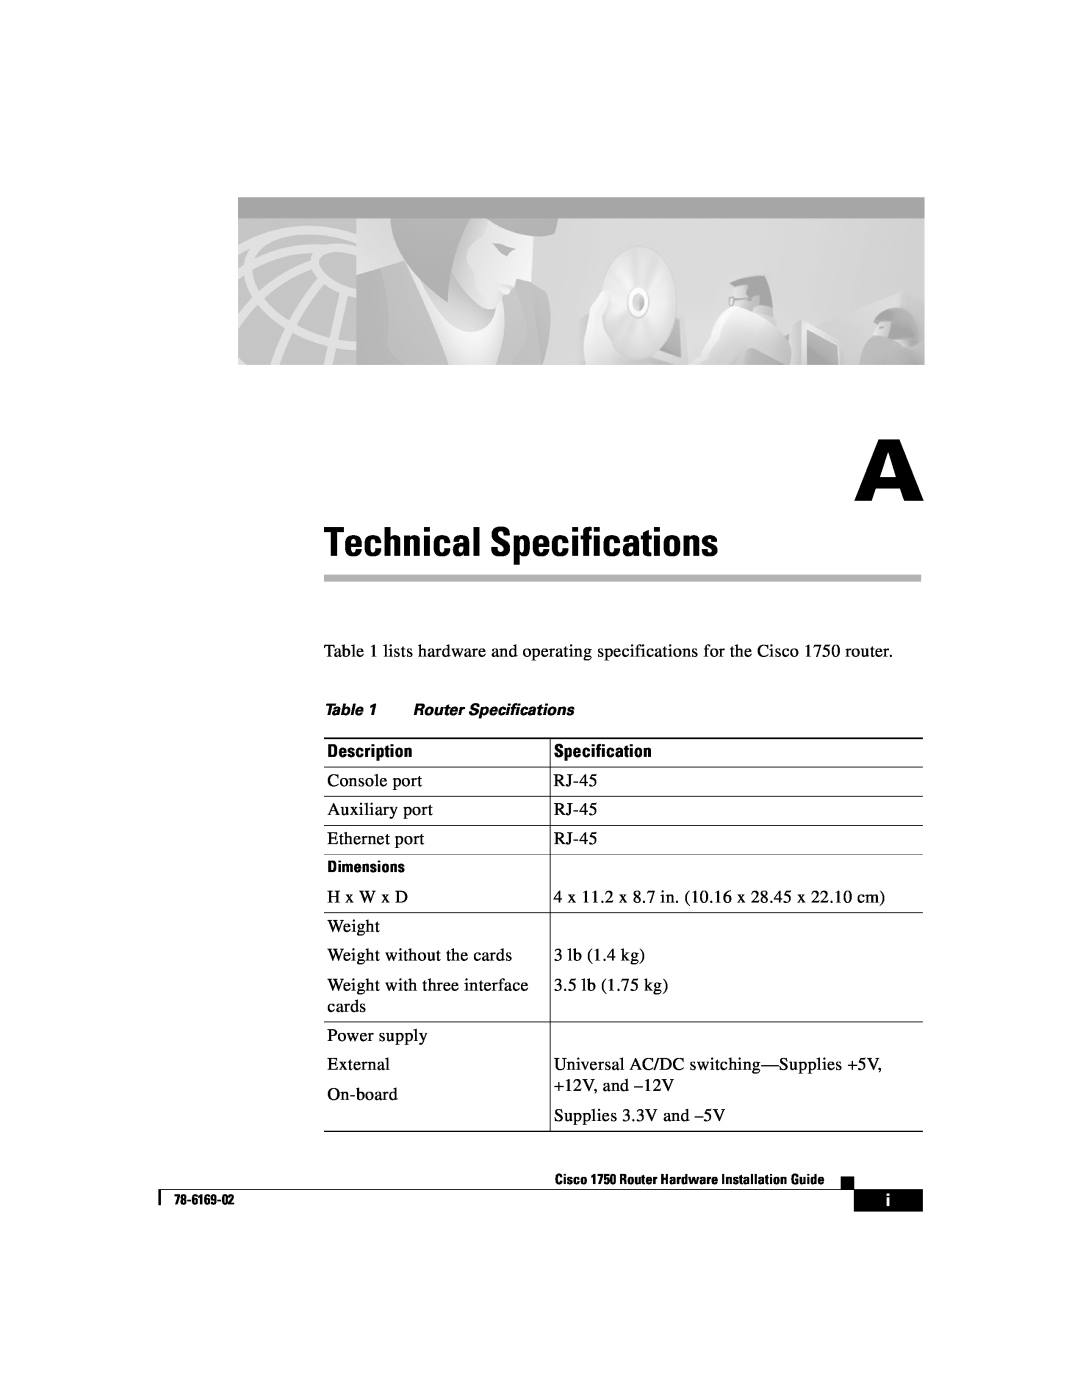 Cisco Systems CISCO1750 manual Technical Specifications 